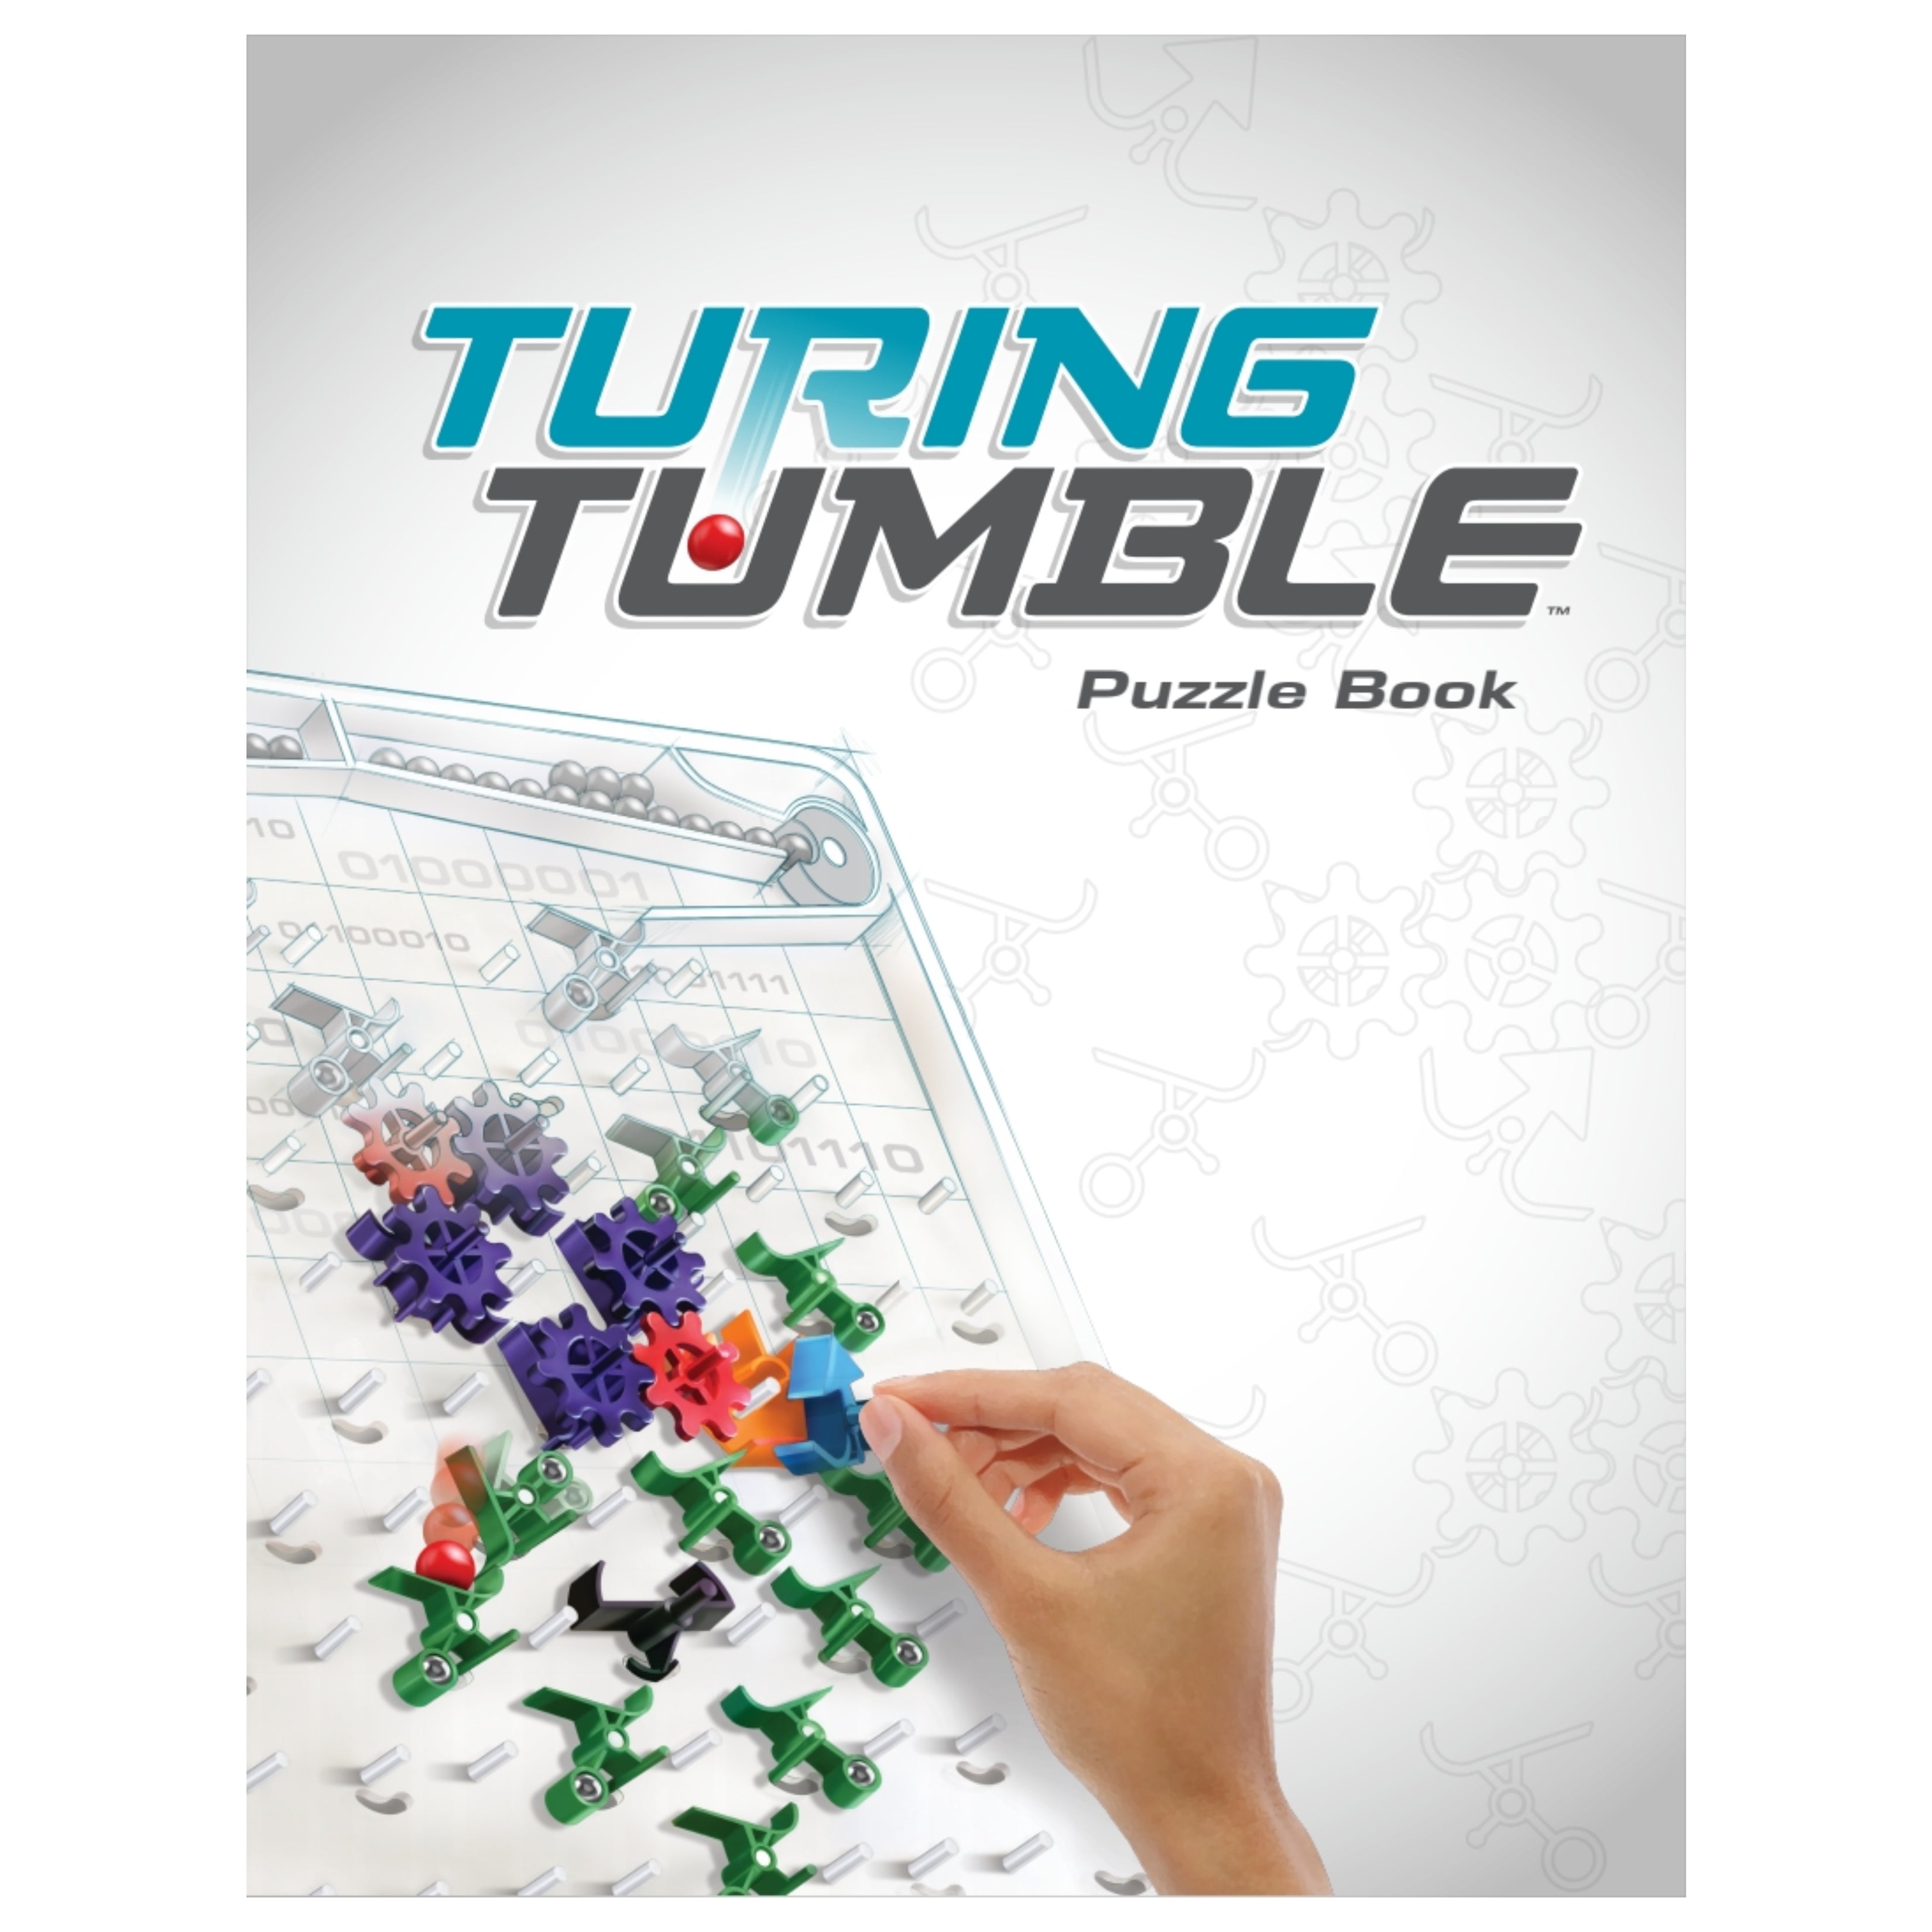 Turing Tumble Mechanical Computer - Mary Arnold Toys